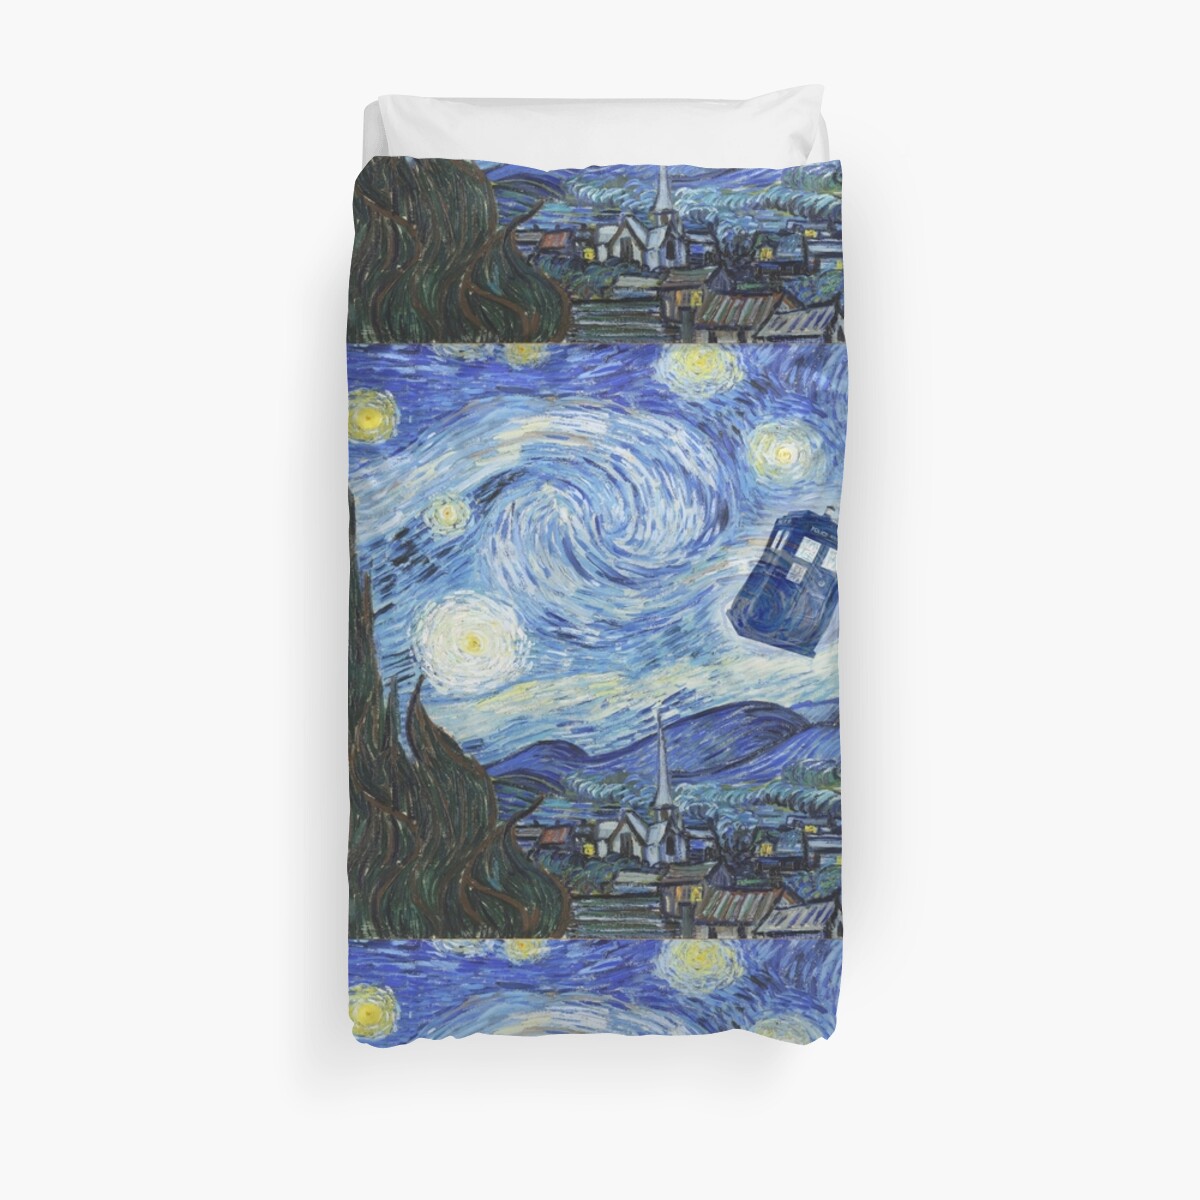 Vincent And The Doctor Duvet Cover By Bosphorus Redbubble